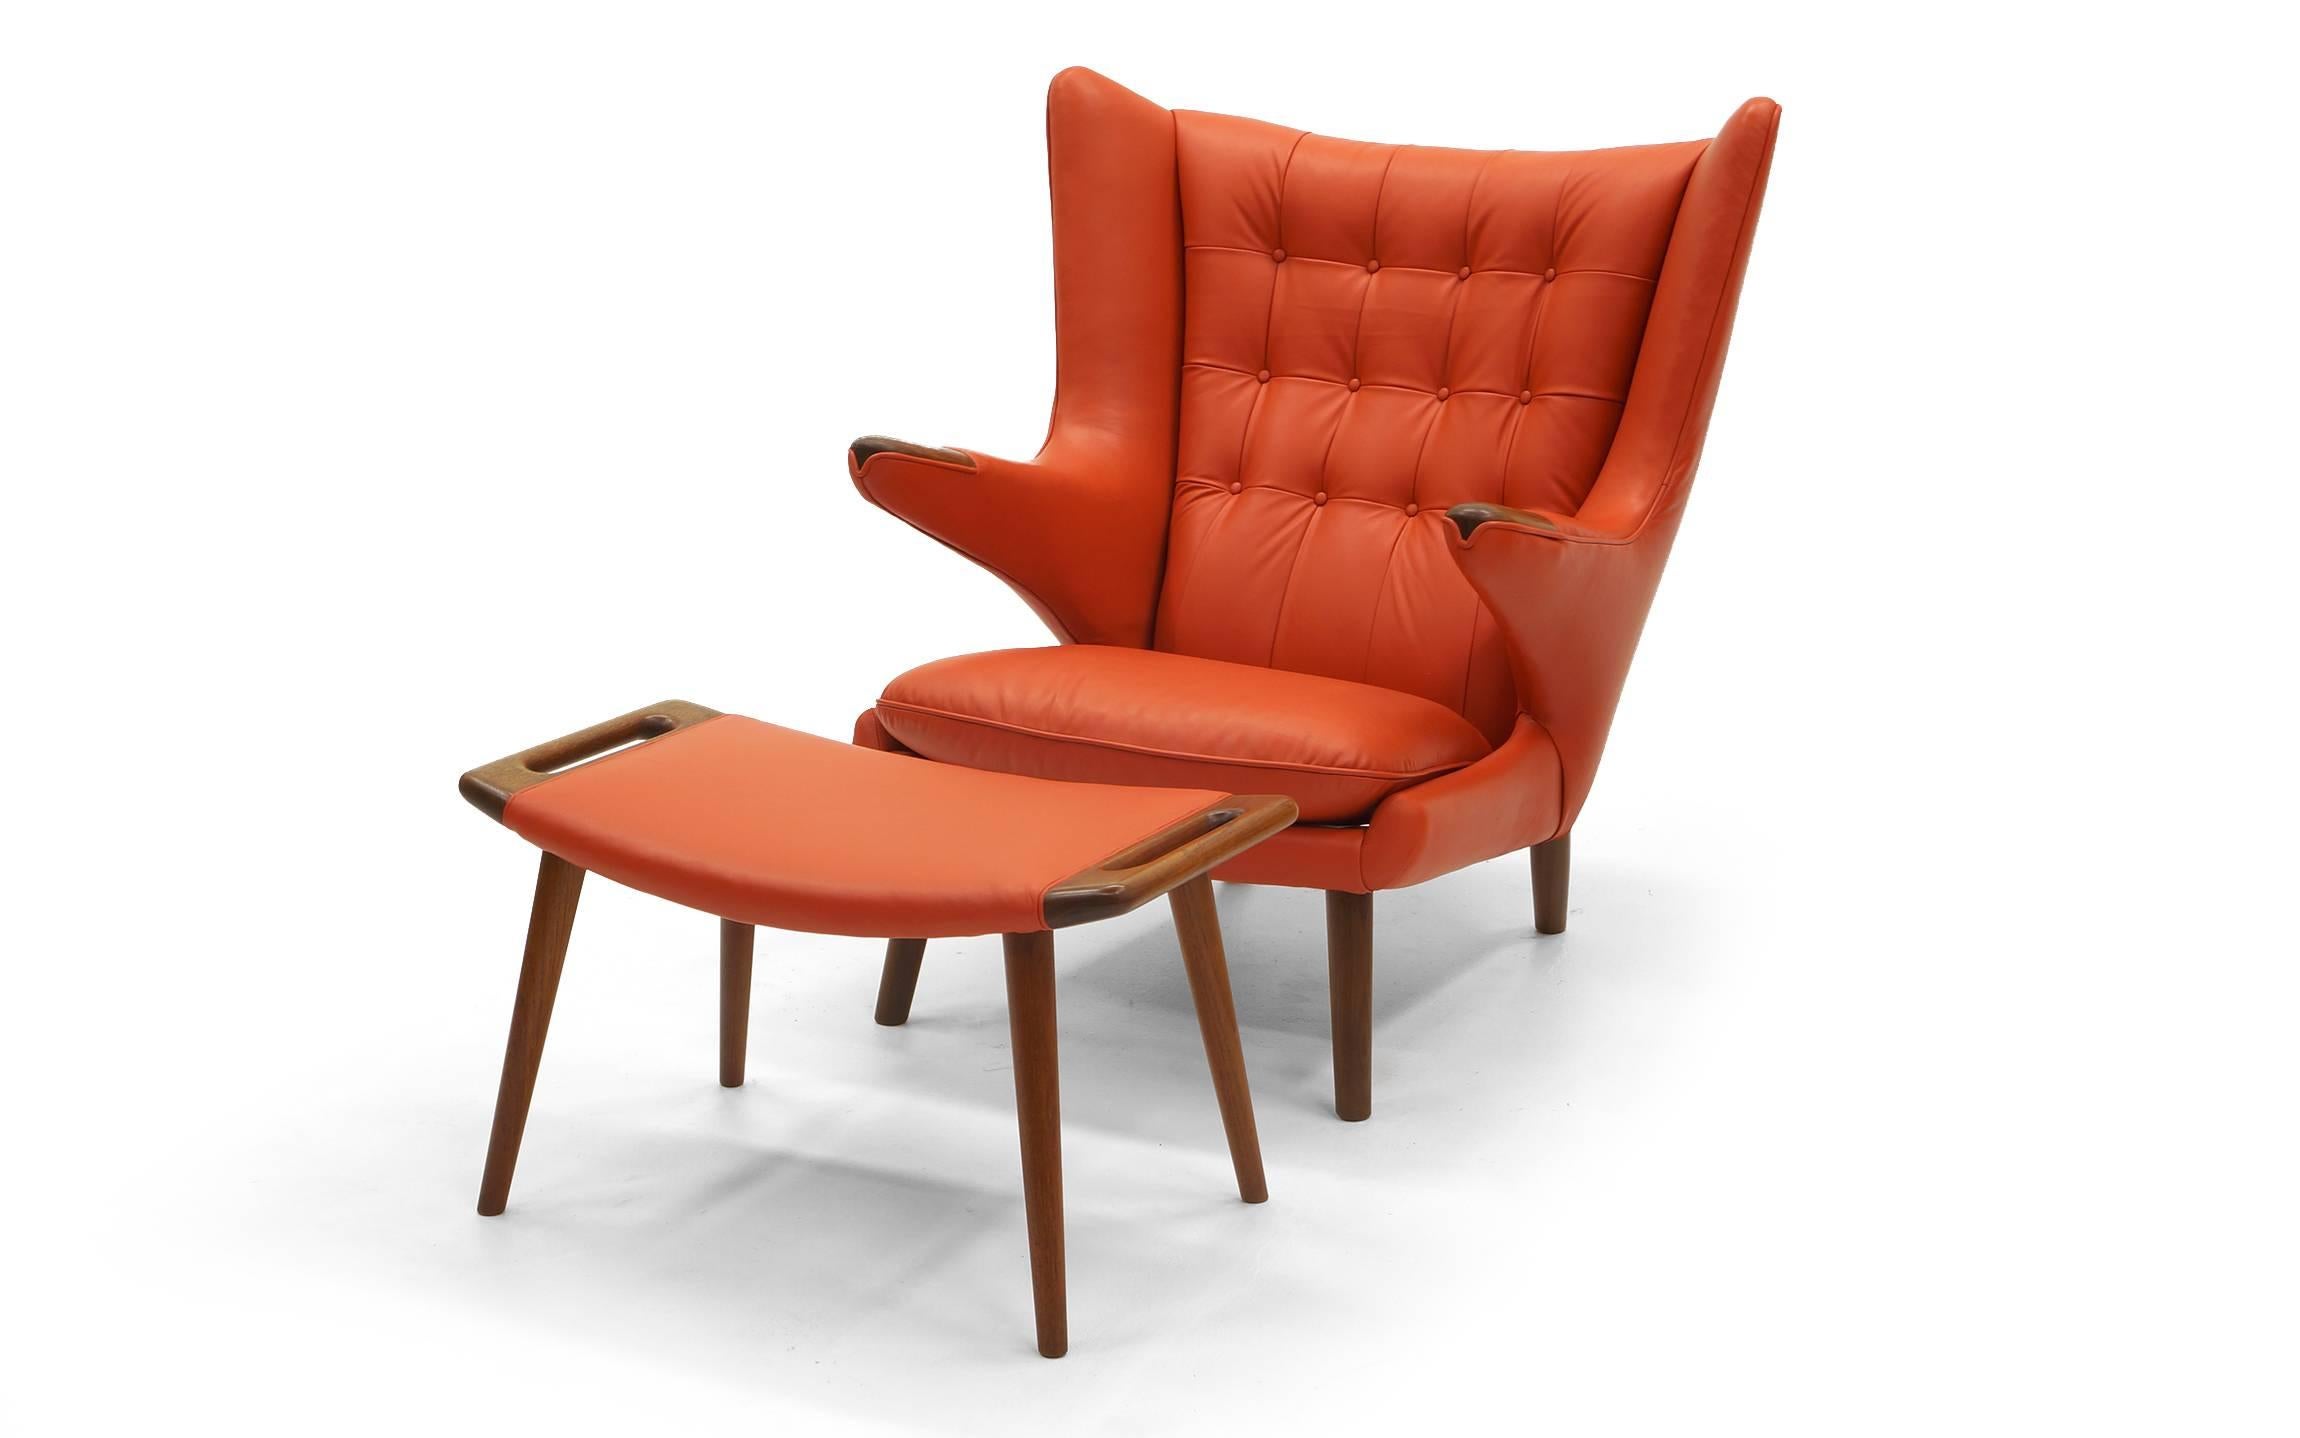 Pair of original Hans Wegner Papa Bear chairs with Ottomans made by A.P. Stolen, Denmark, circa 1950s. Expertly restored and reupholstered in orange spinney beck leather. One ottoman is stamped A.P. Stolen, Copenhagan, Designer Hans Wegner. Chairs